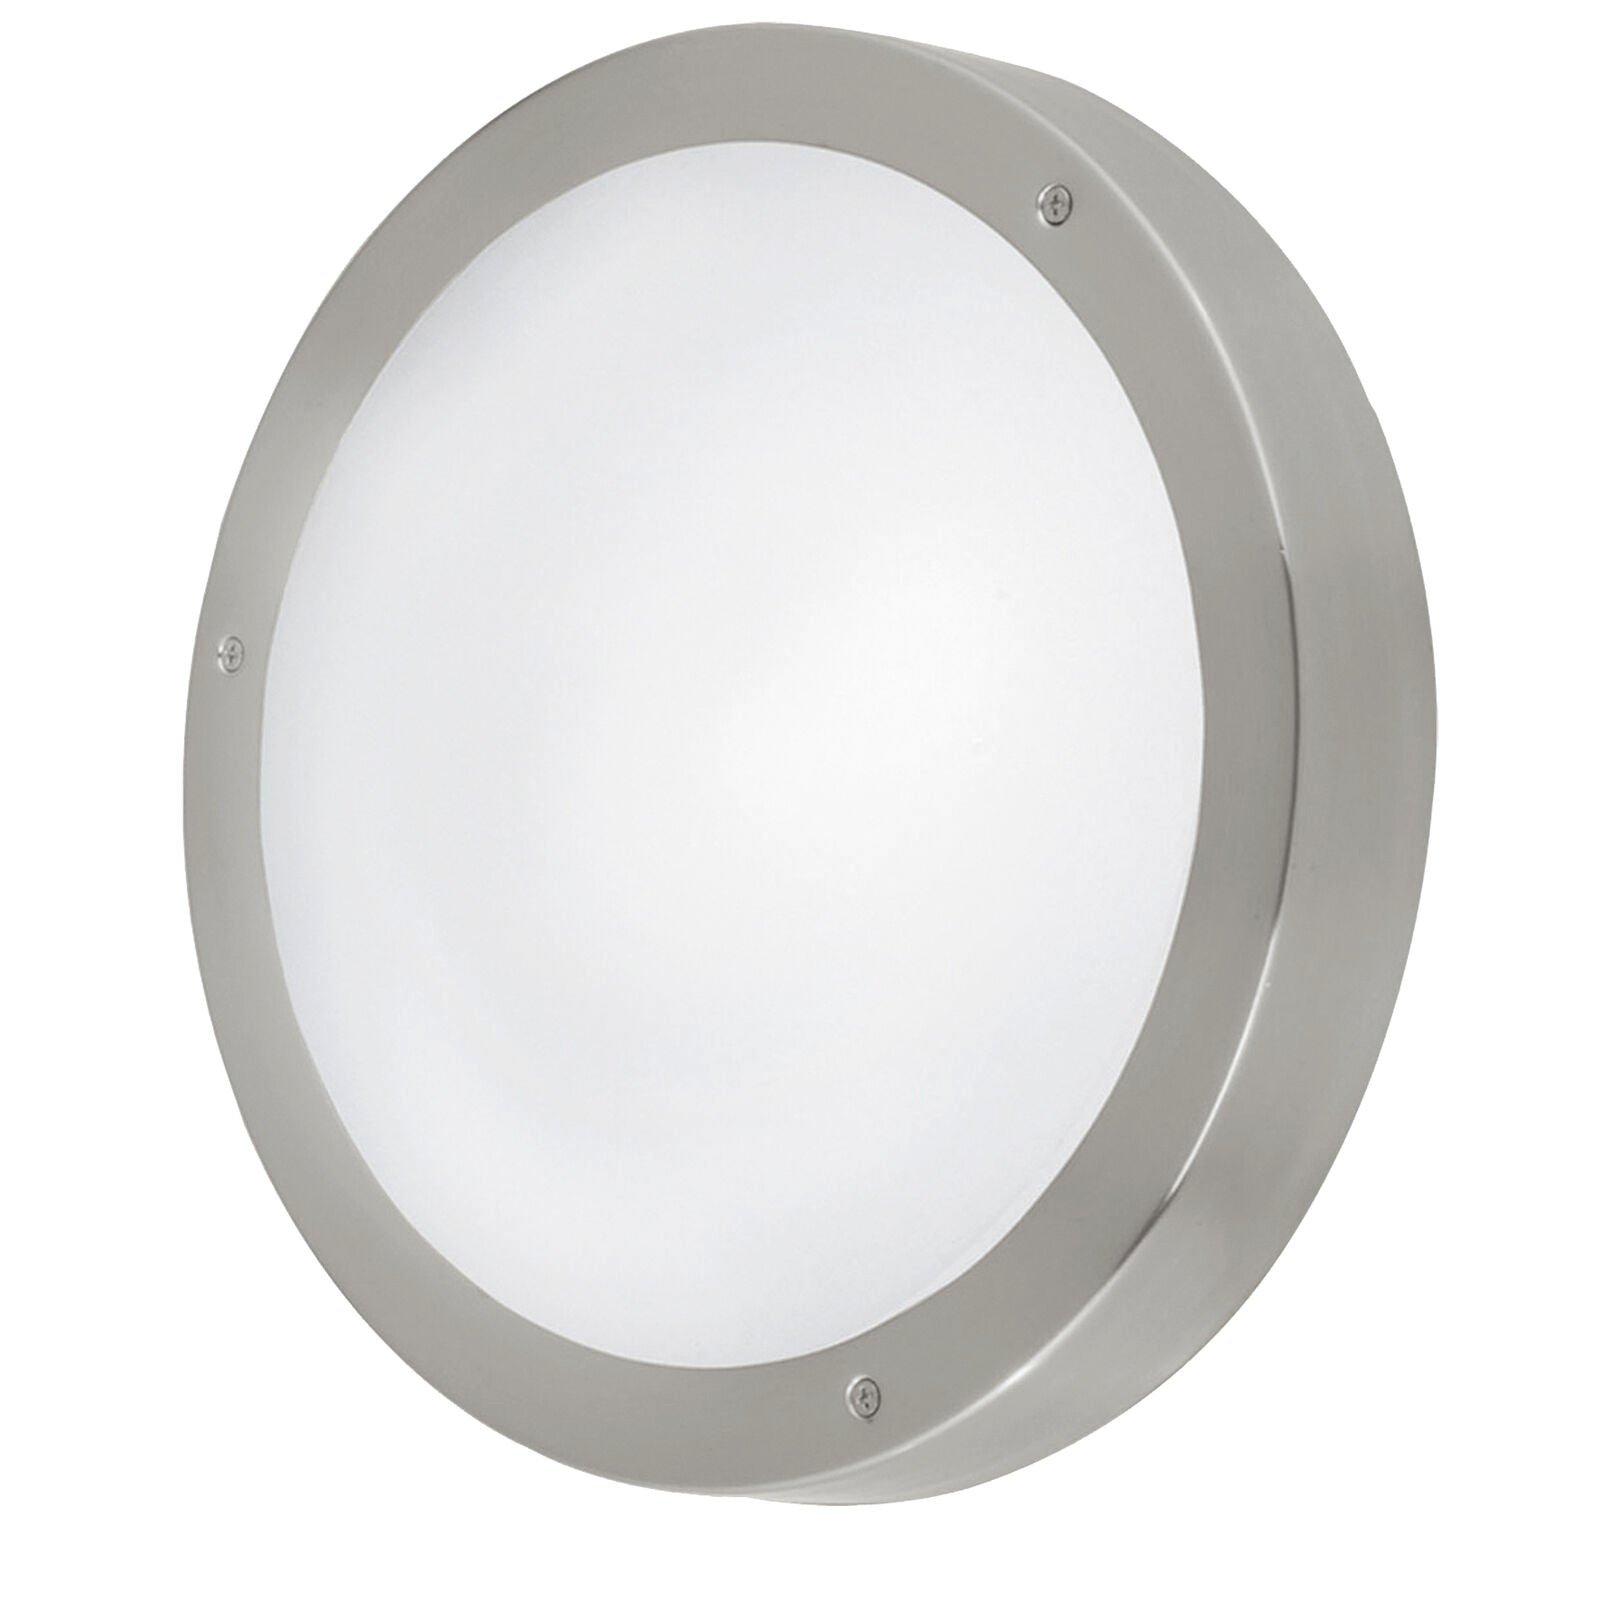 IP44 Outdoor Wall Light Round Stainless Steel 11W Built in LED Porch Lamp